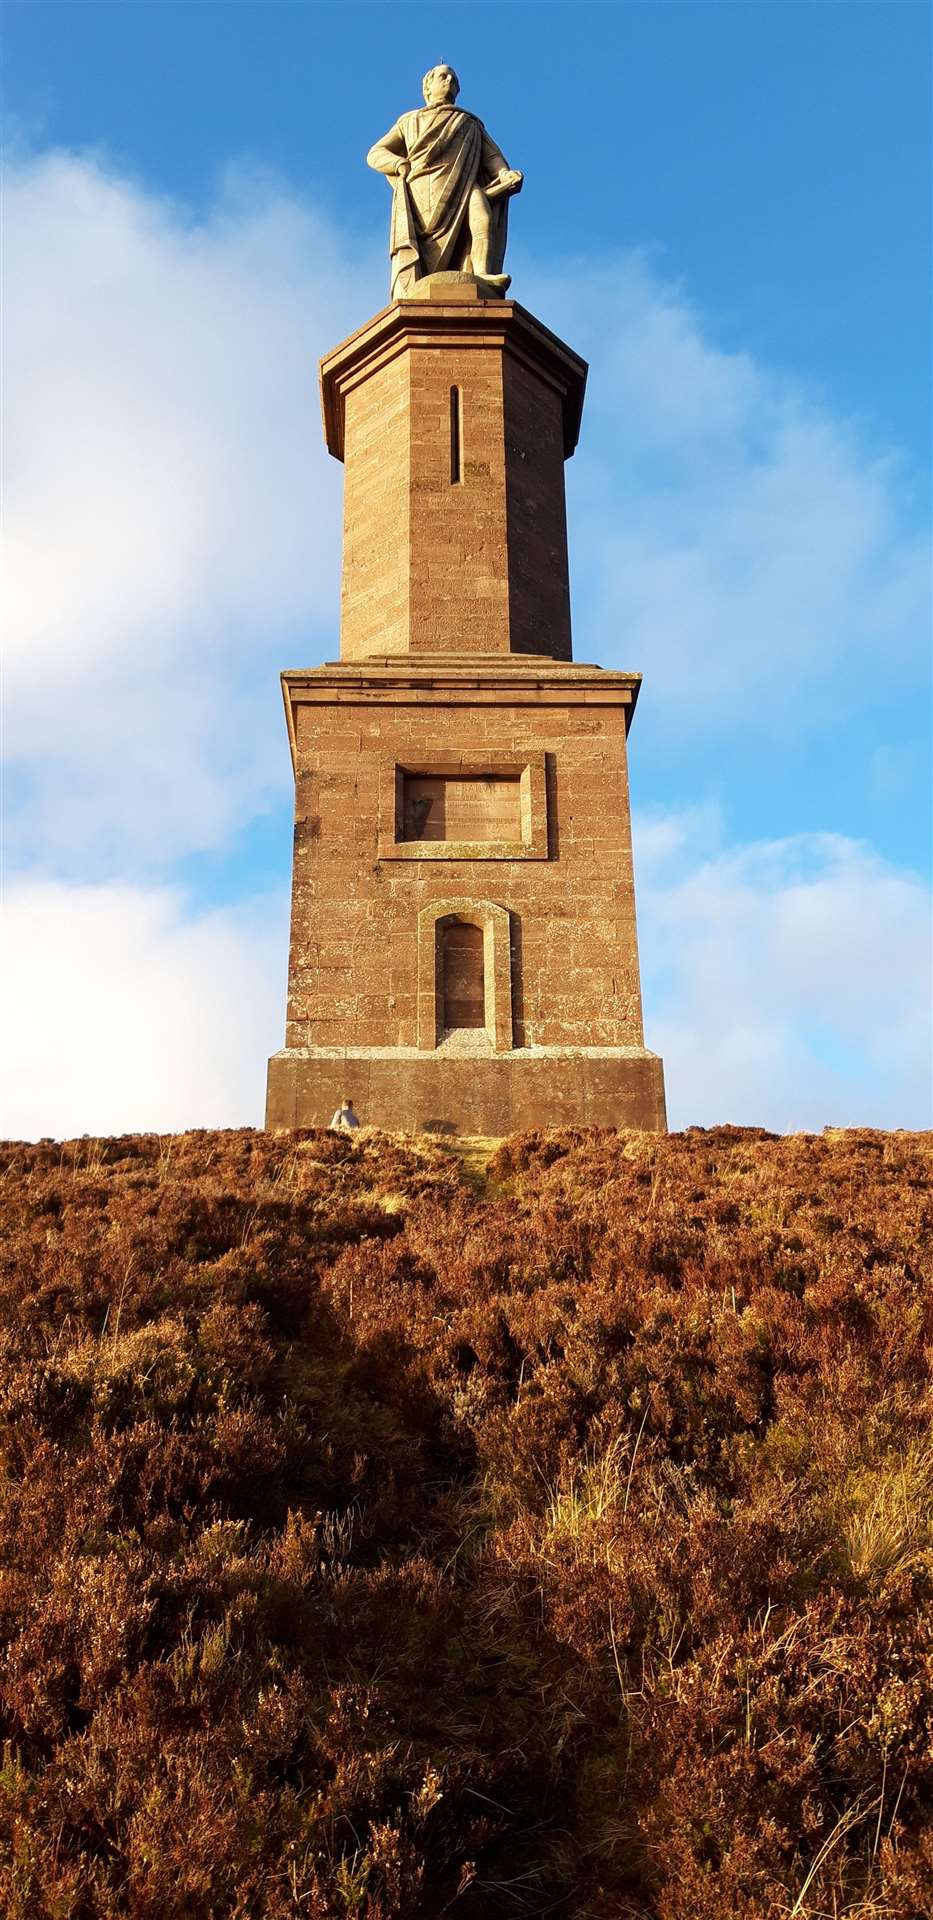 The Duke of Sutherland's statue at the top of Ben Bhraggie, Golspie.